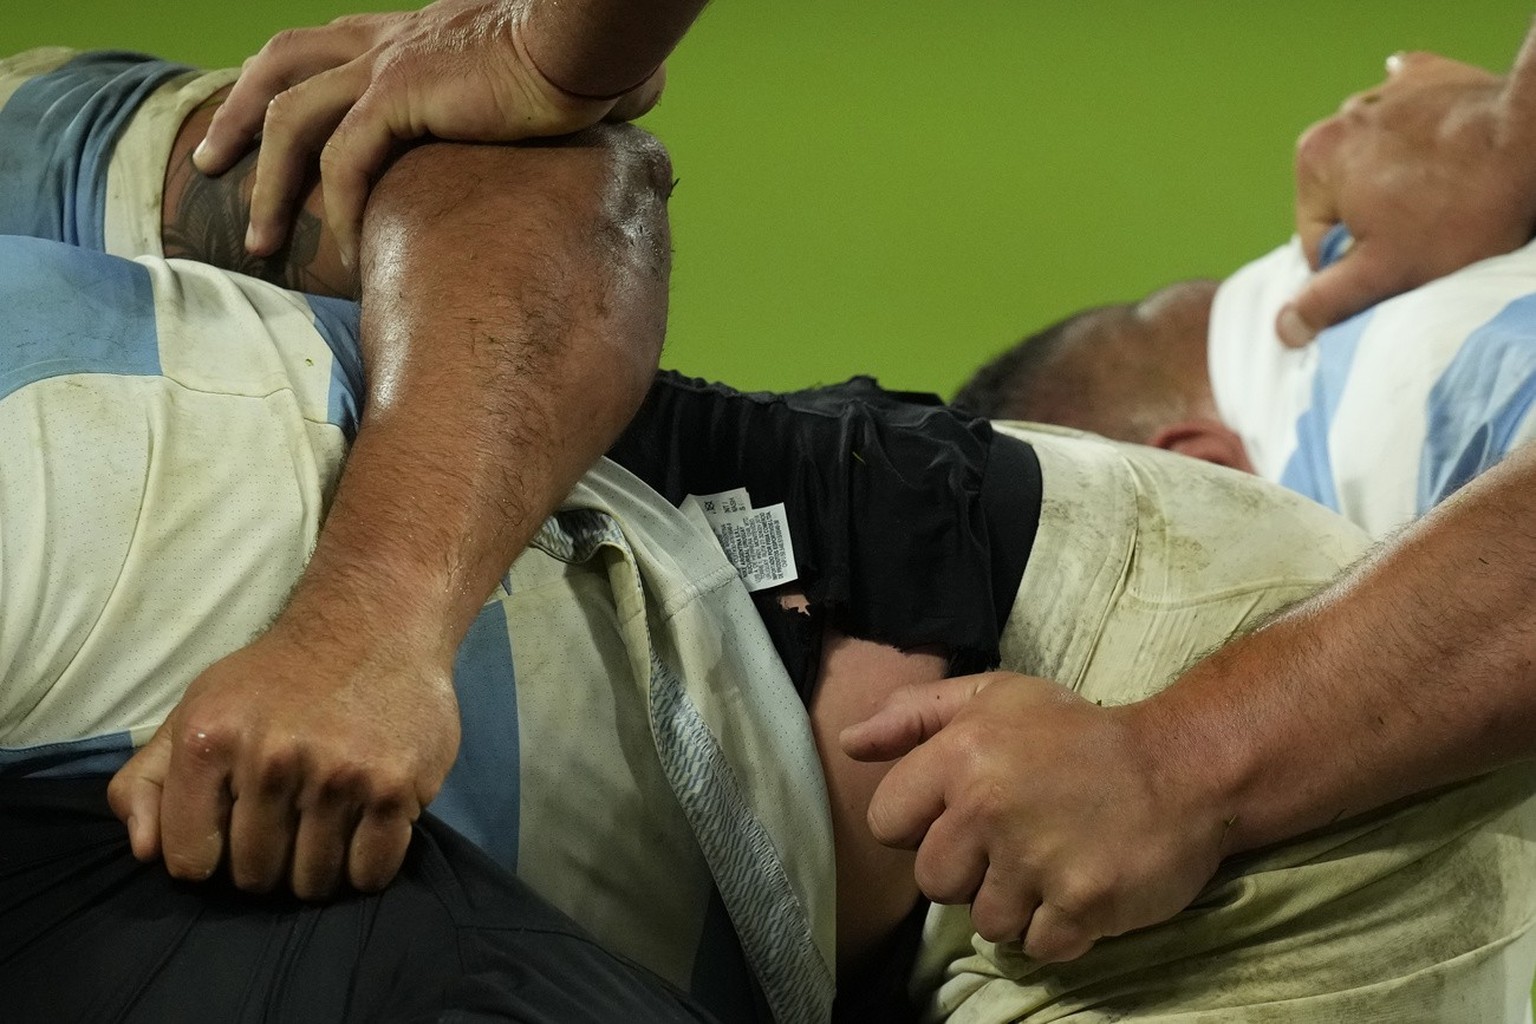 Hands grapple in a ruck during the Rugby World Cup semifinal match between Argentina and New Zealand at the Stade de France in Saint-Denis, outside Paris, Friday, Oct 20, 2023. (AP Photo/Christophe En ...